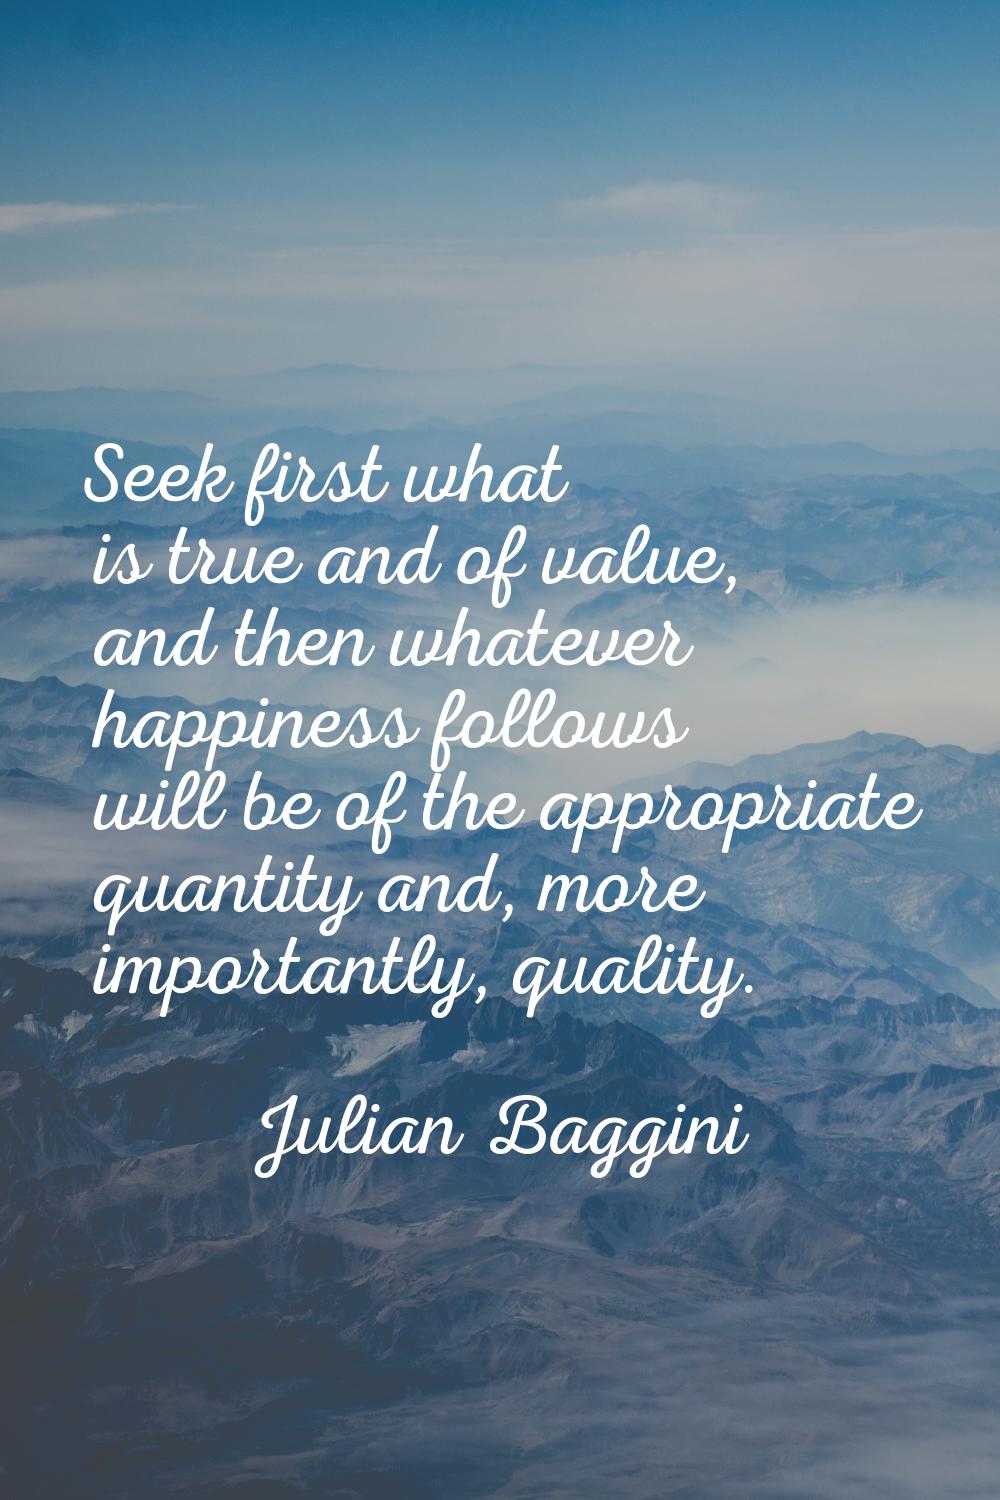 Seek first what is true and of value, and then whatever happiness follows will be of the appropriat